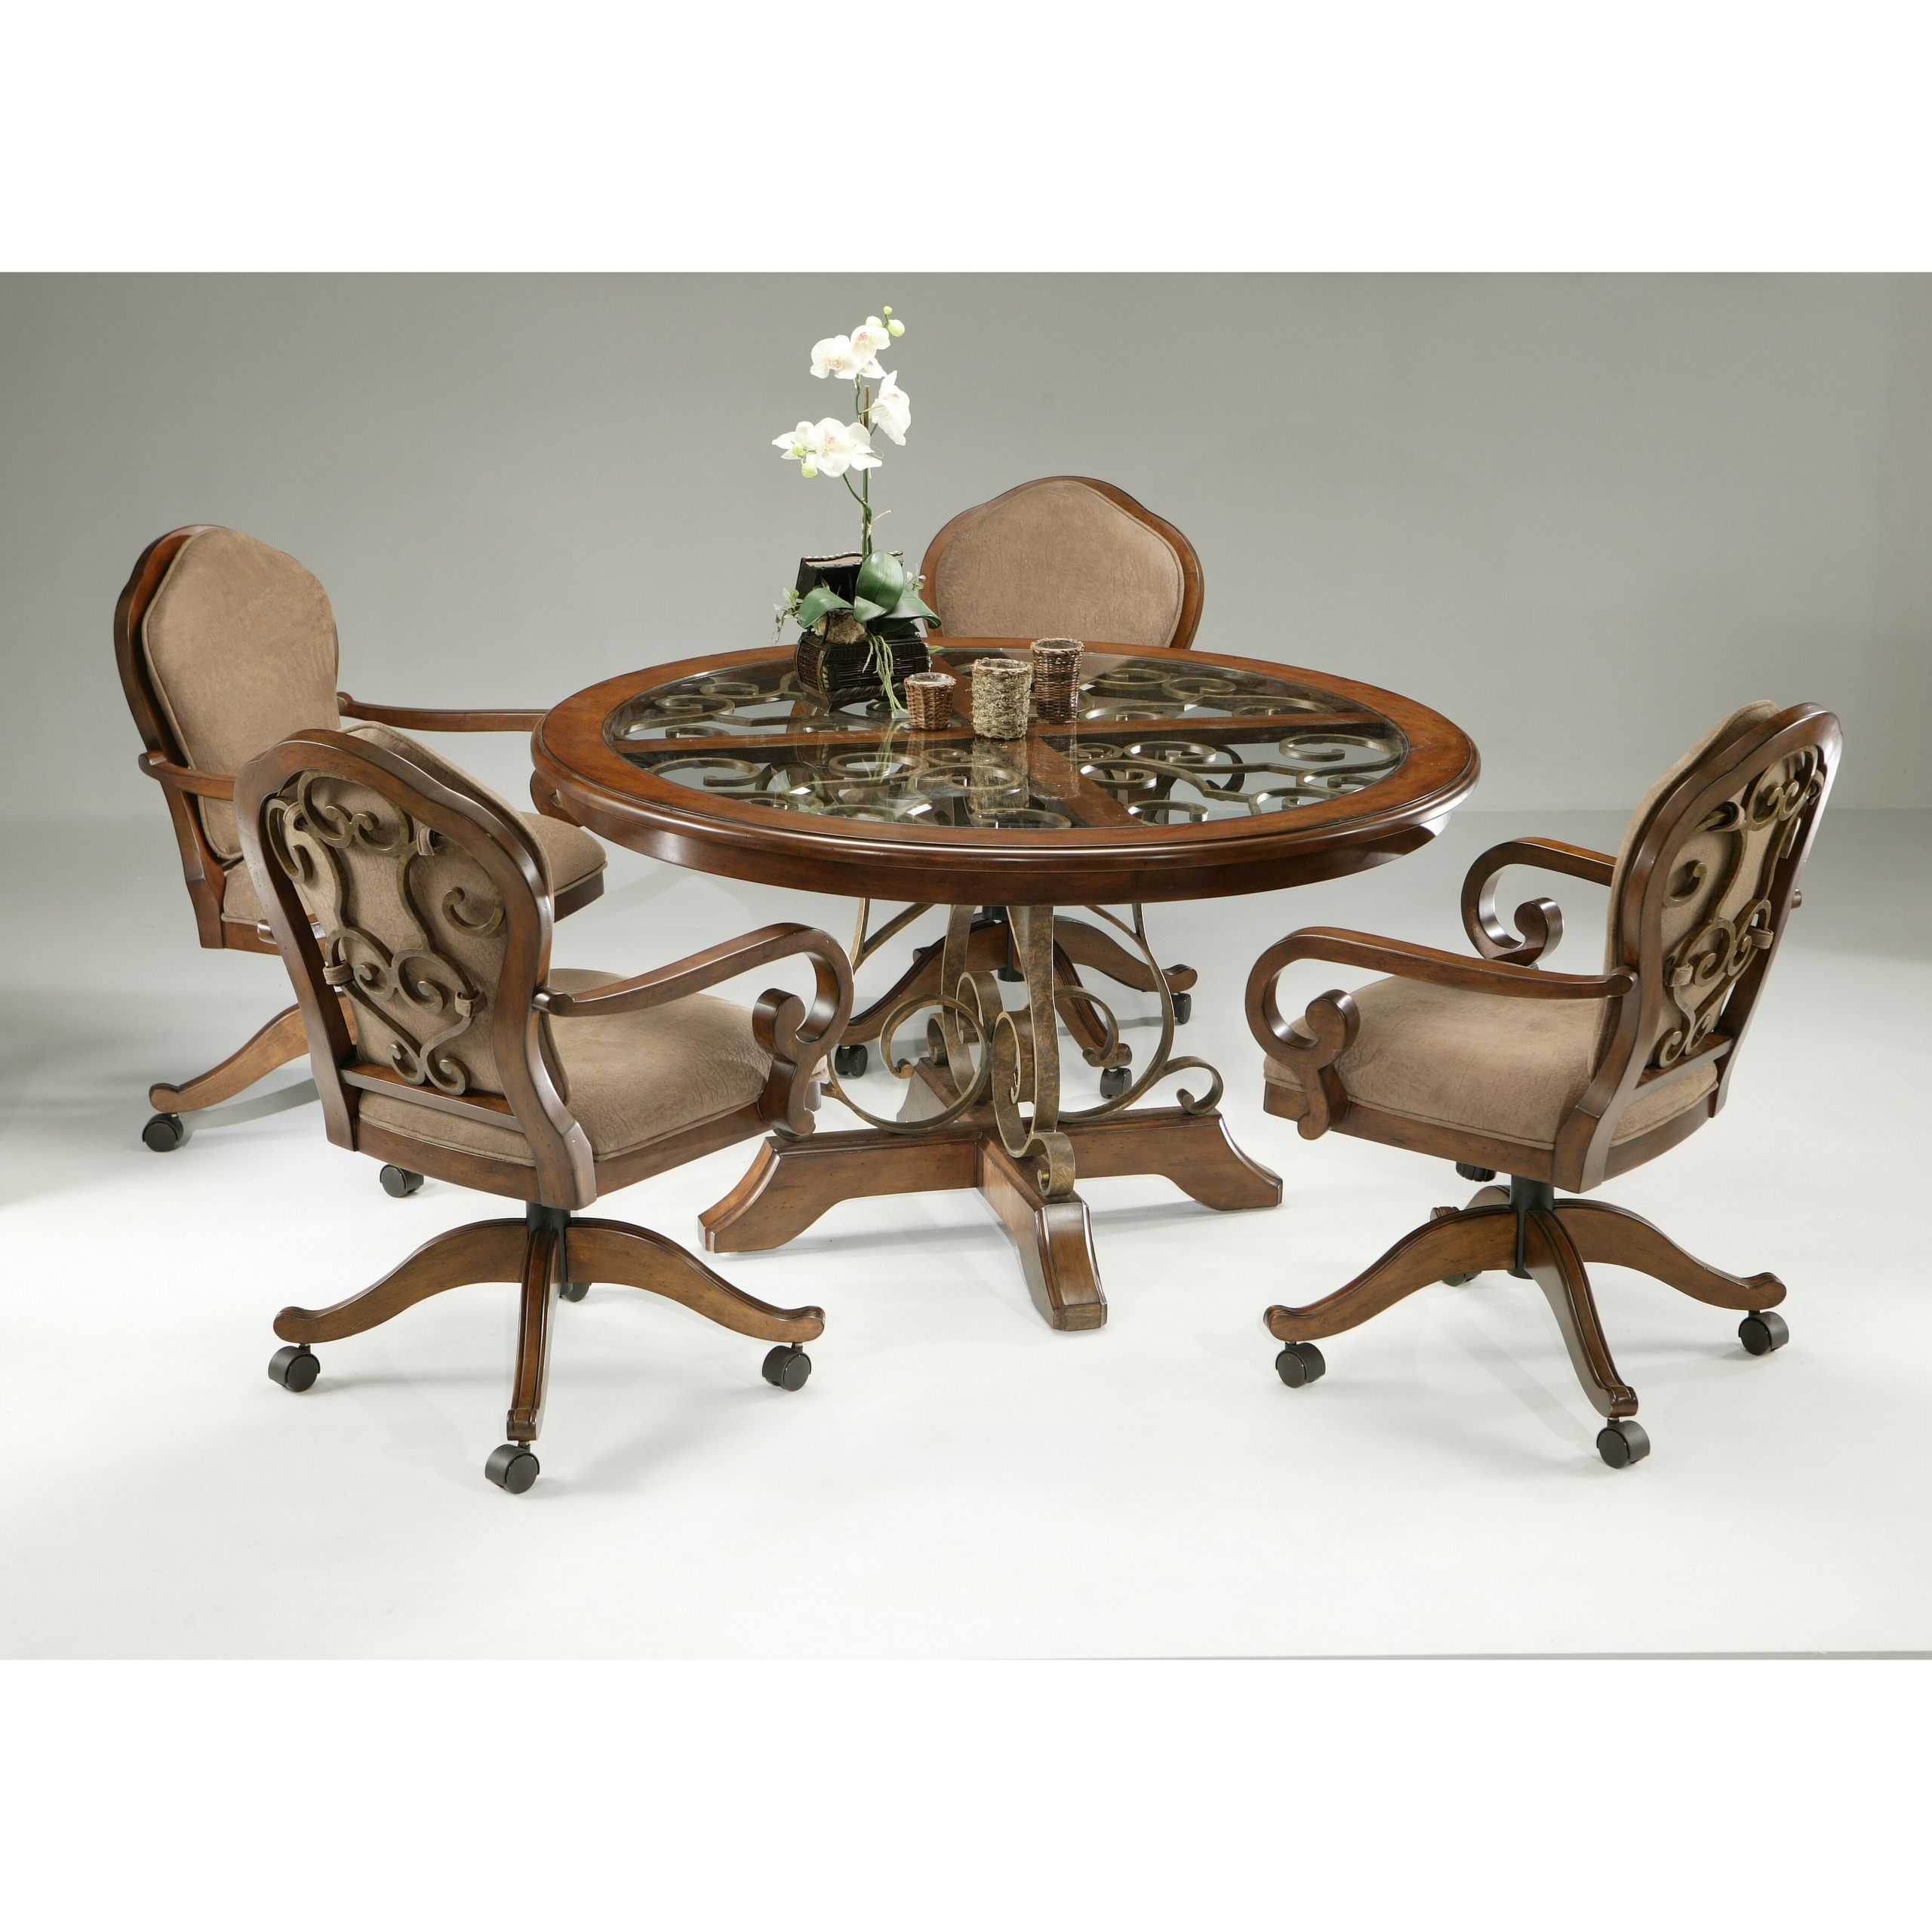 Dining Chairs With Casters You Ll Love, Fabric Dining Room Chairs With Casters